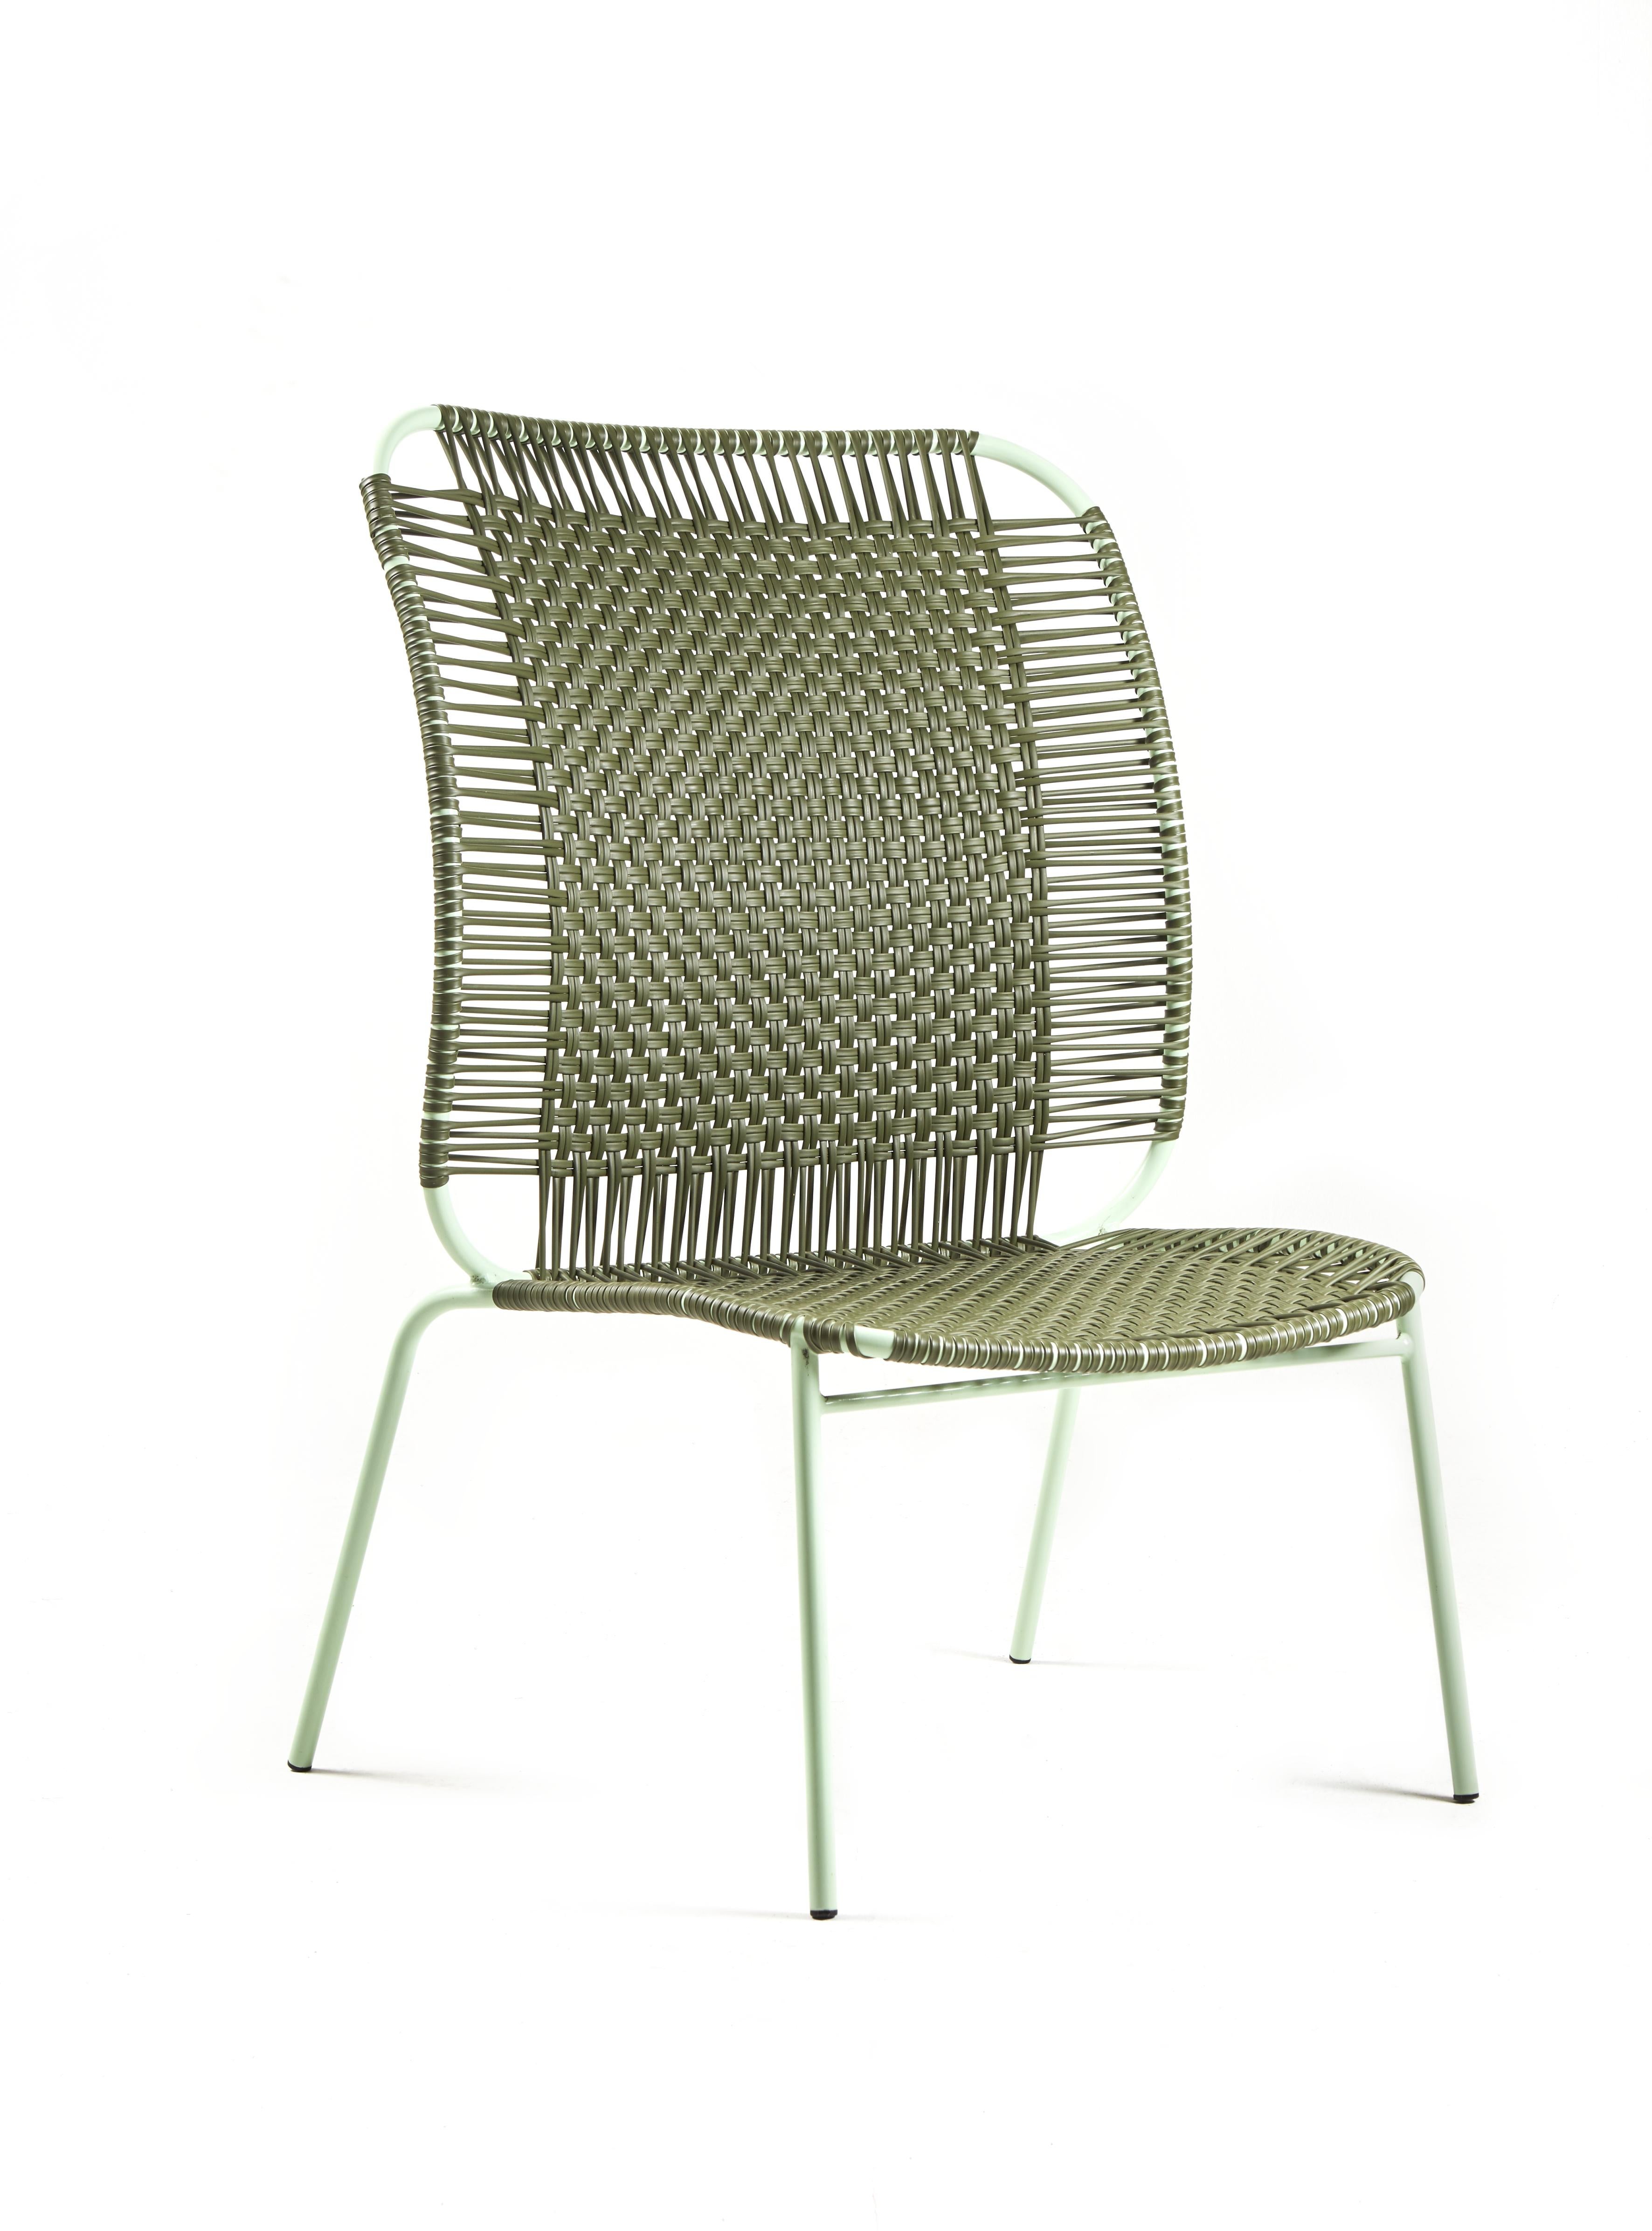 Set of 2 olive Cielo lounge high chair by Sebastian Herkner
Materials: Galvanized and powder-coated tubular steel. PVC strings are made from recycled plastic.
Technique: Made from recycled plastic and weaved by local craftspeople in Cartagena,